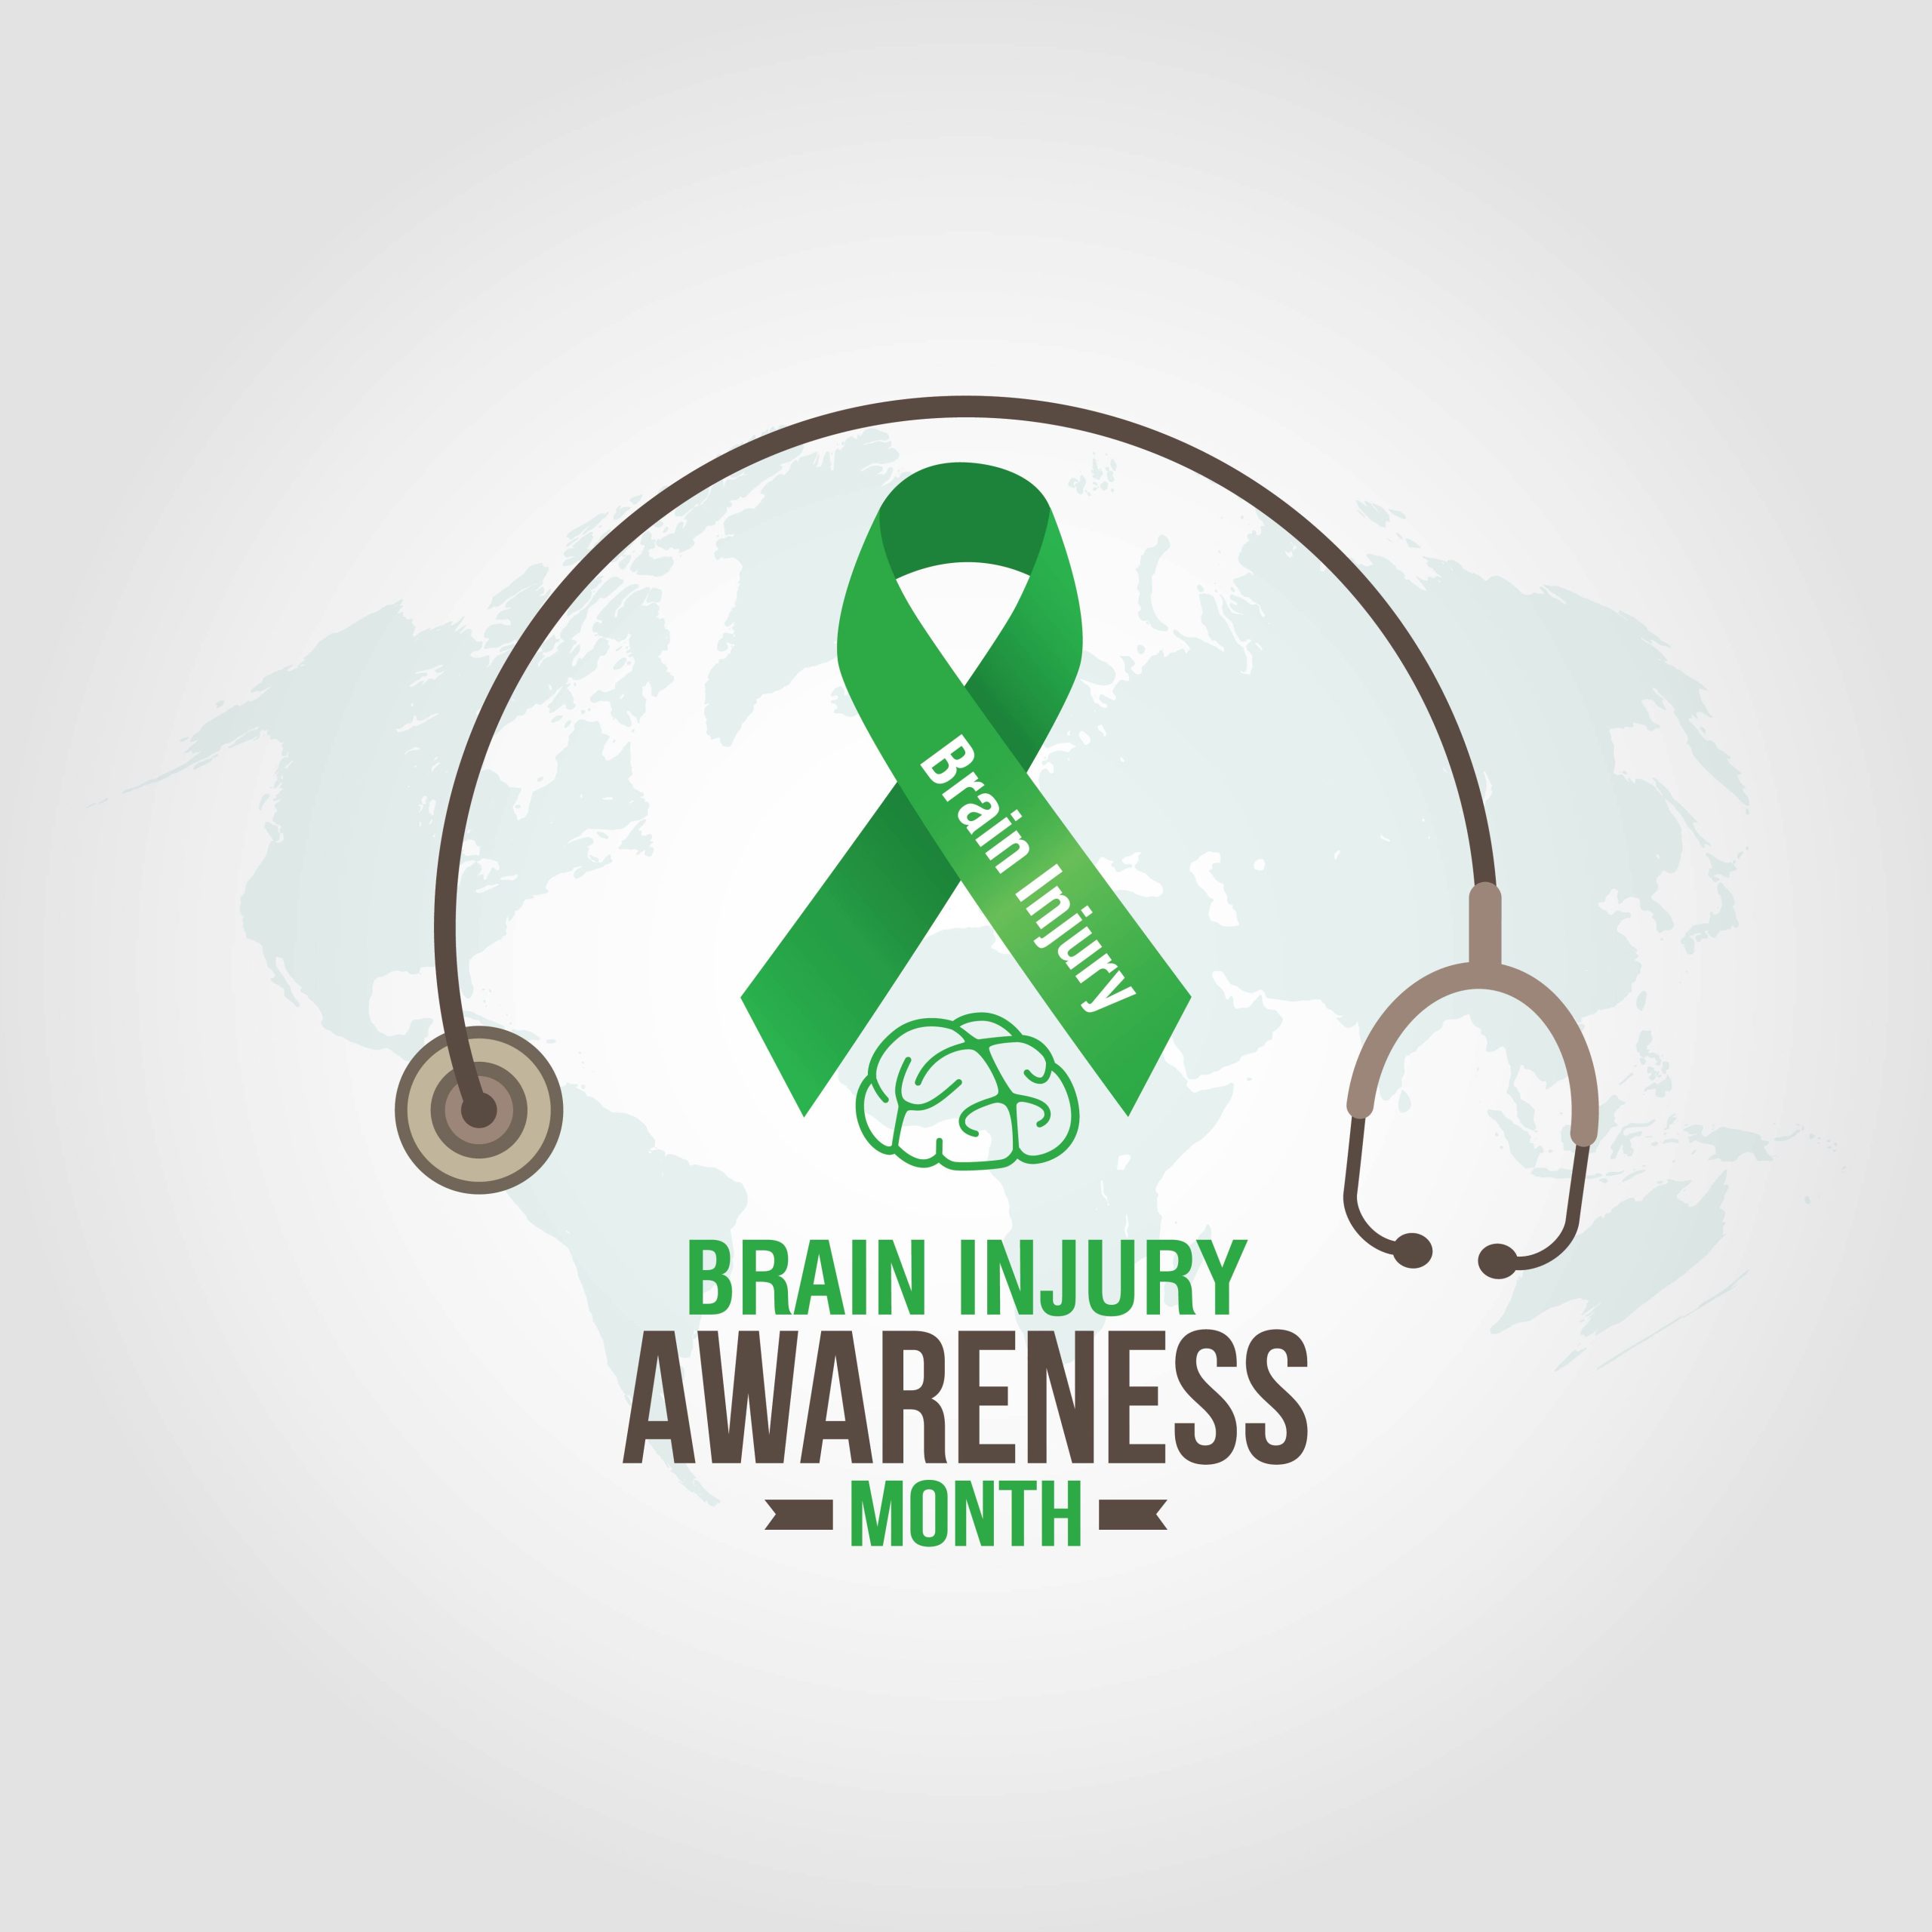 6. Brain injuries are a significant cause of death and impairment in America